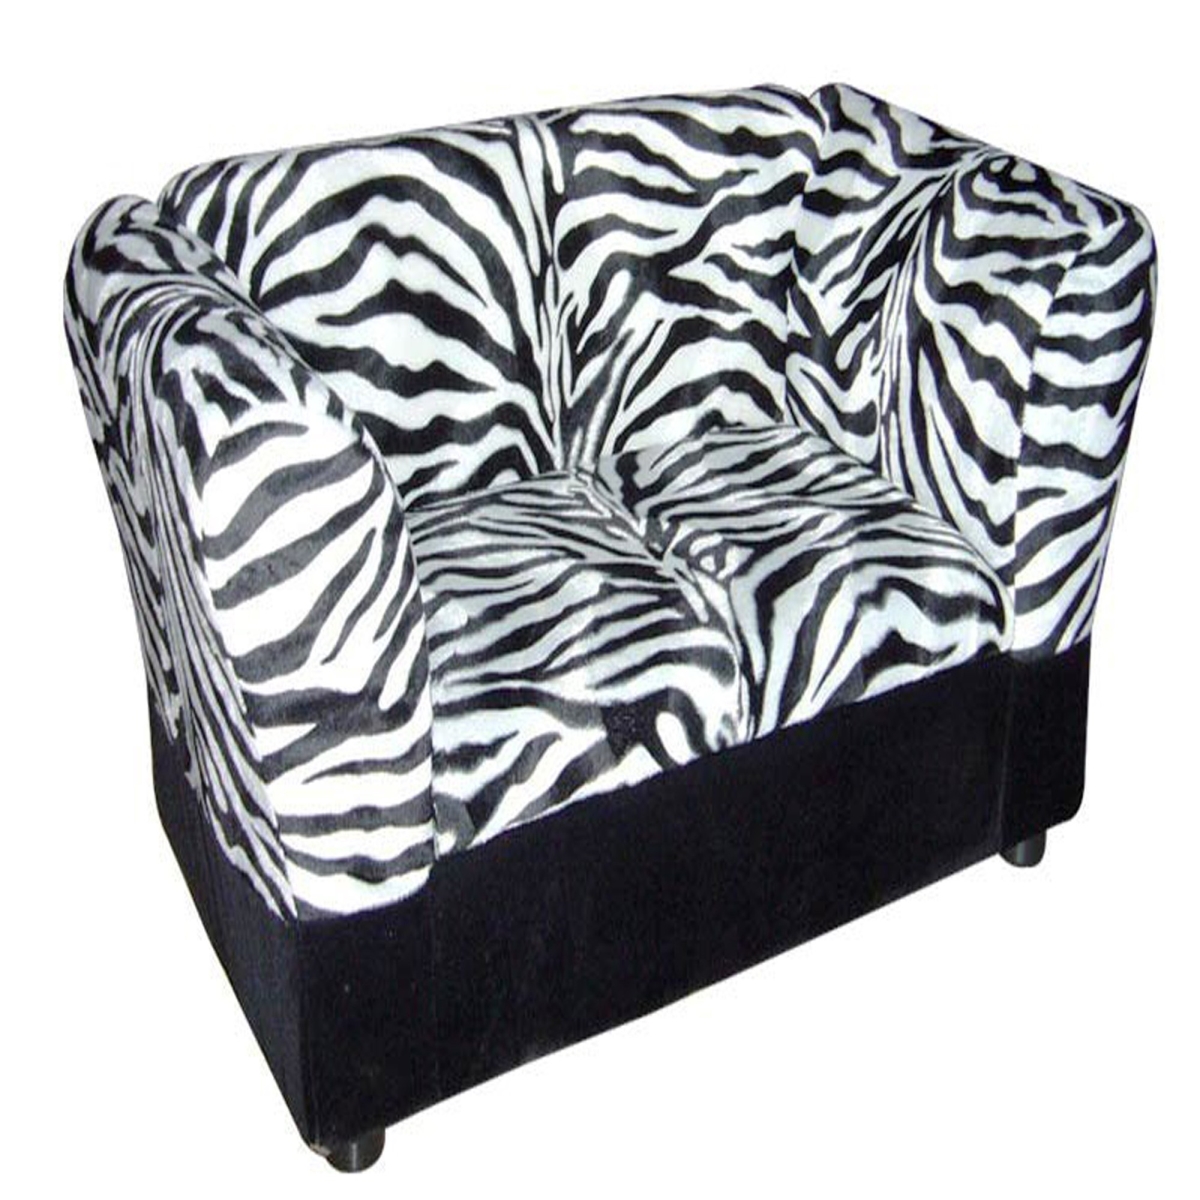 Homeroots Bed & Bath 20" Zebra Print Upholstered Club Chair Style Dog Bed